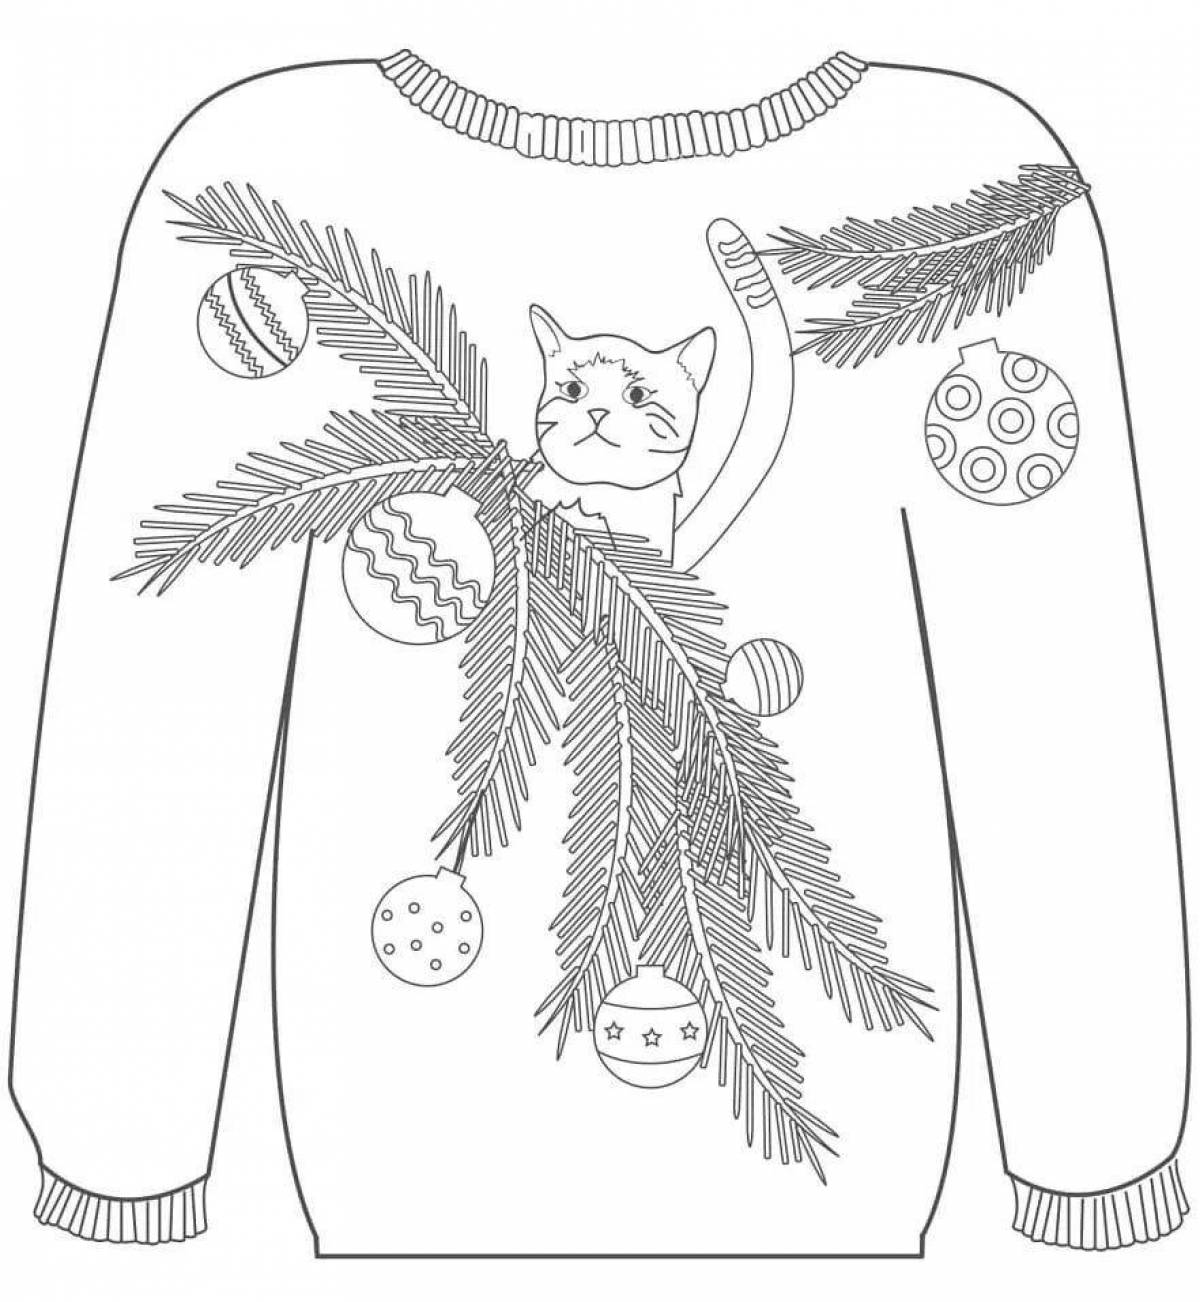 Adorable sweater coloring book for 4-5 year olds